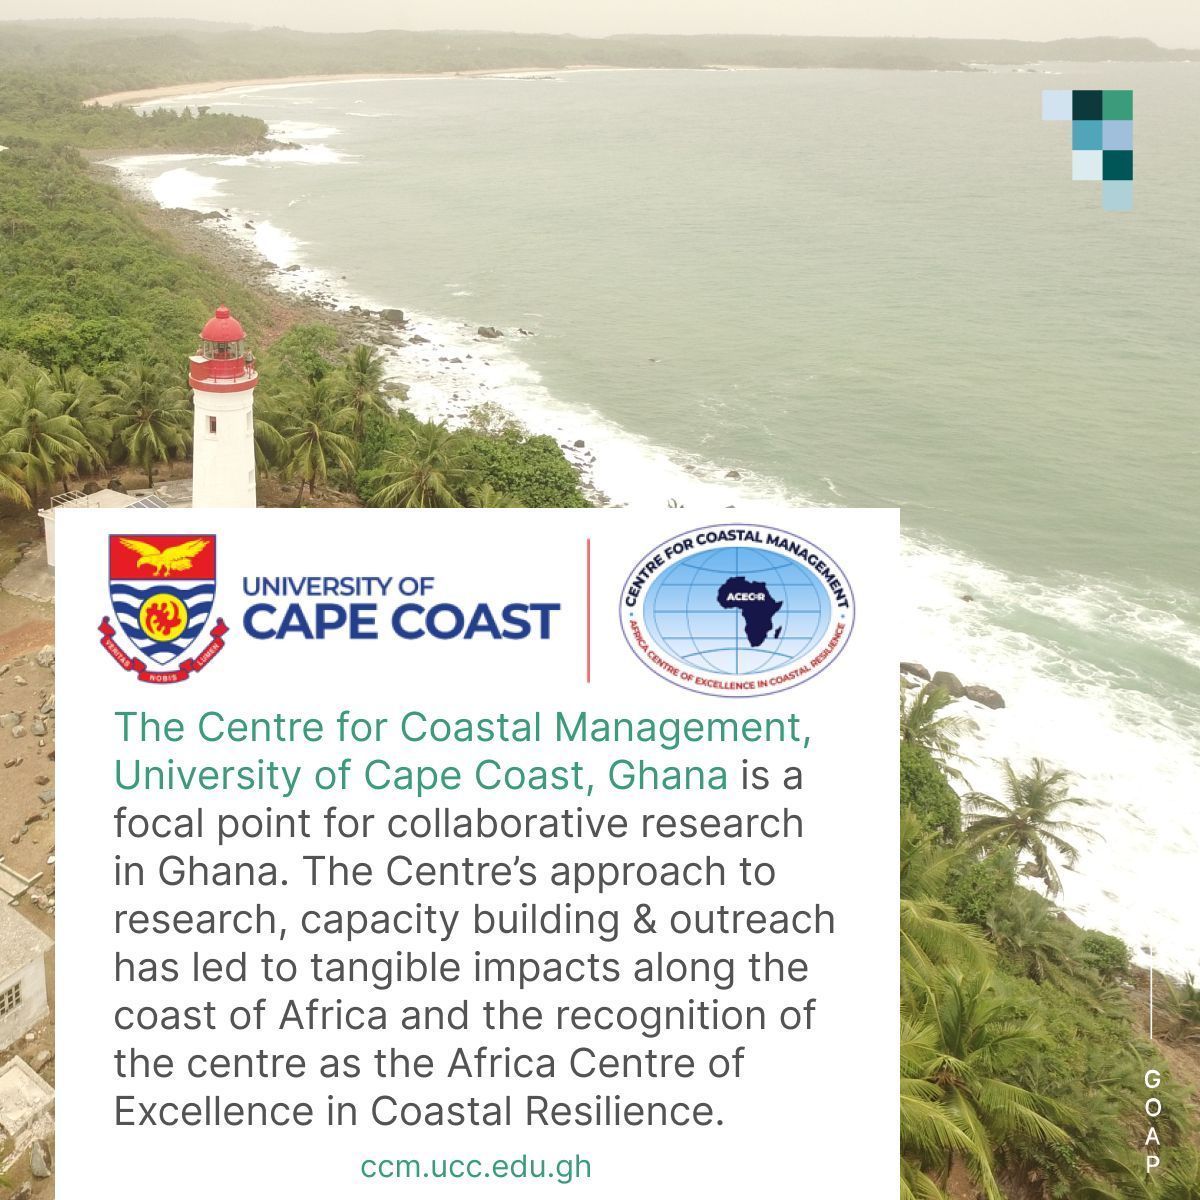 🌍 Growing GOAP Membership in Africa - welcoming @ccm_ucc from @UCCGH_Official, Ghana to GOAP! 🤝 GOAP Secretariat looks forward to supporting the CCM's goal to use research to build more resilient coastal communities in Ghana and Africa. Learn more: buff.ly/3TdZ0dr